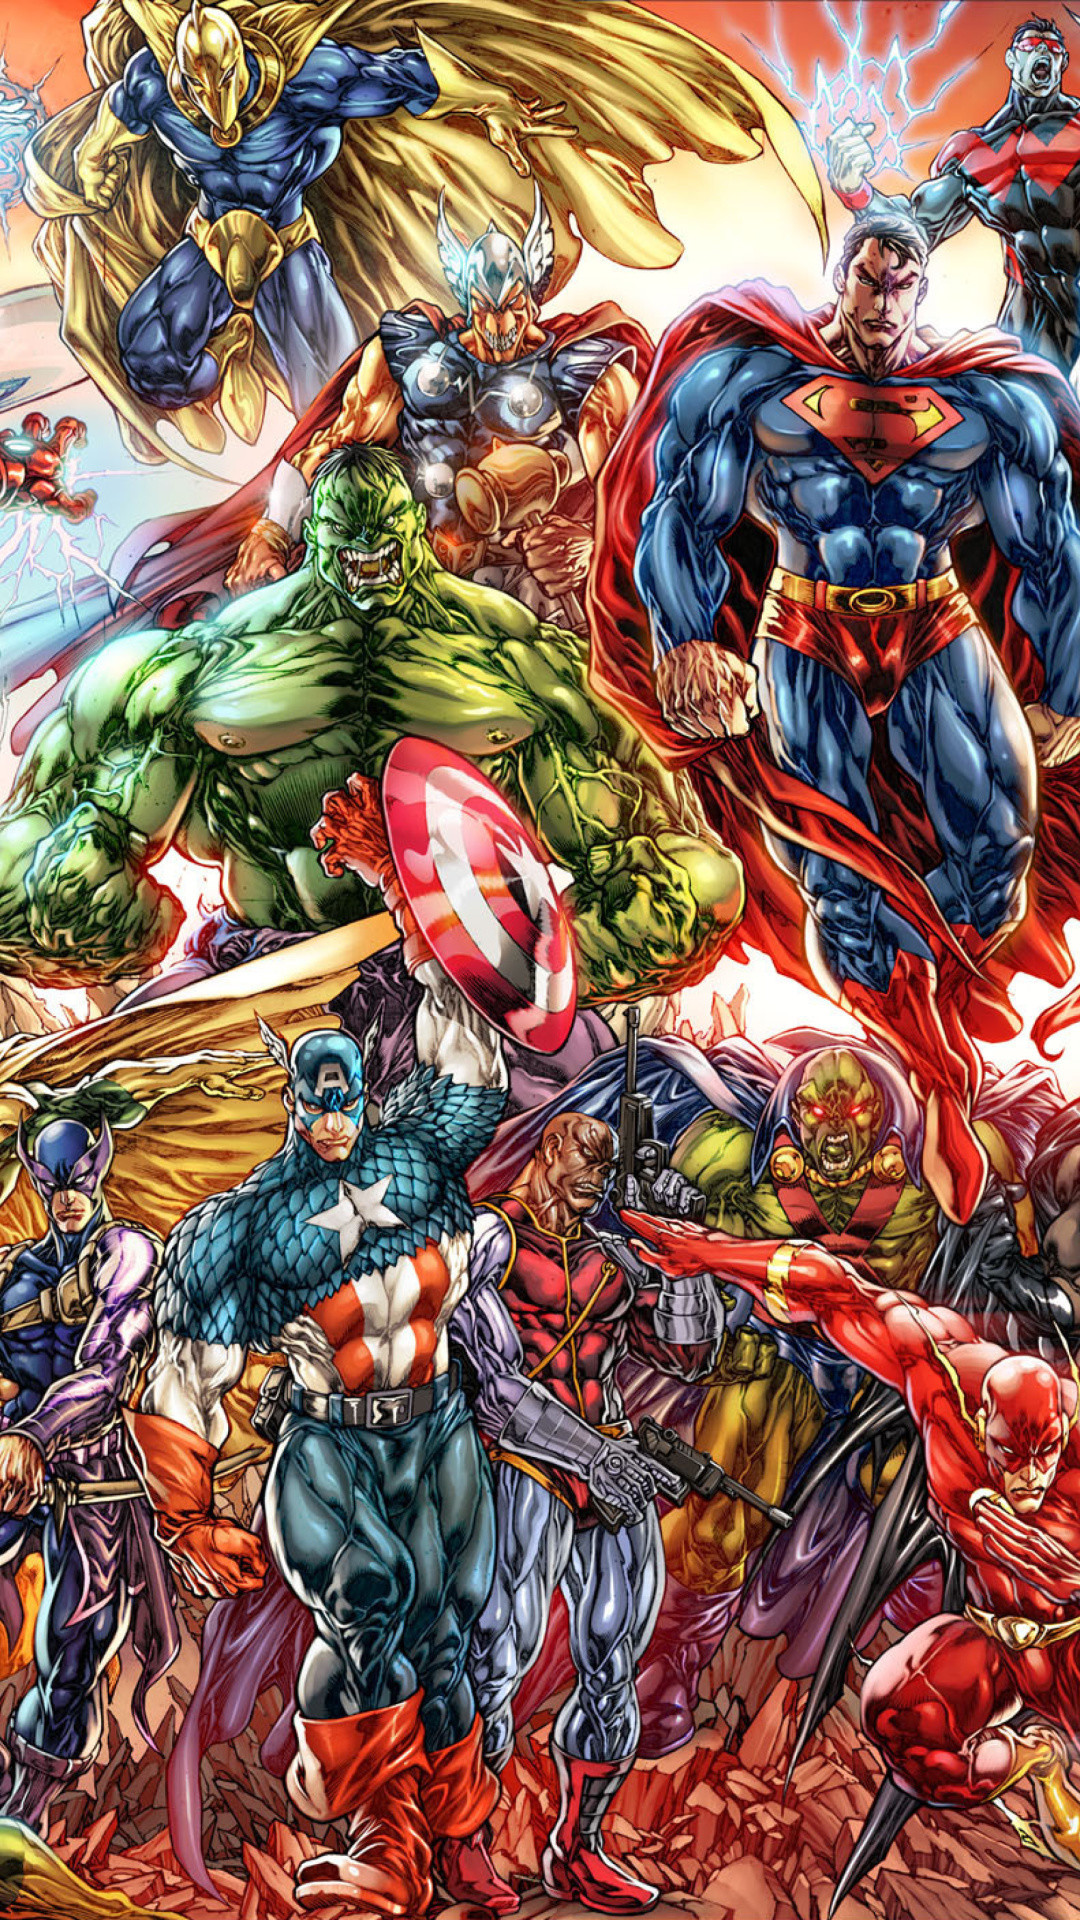 1080x1920 Marvel Wallpapers iPhone 6 Plus